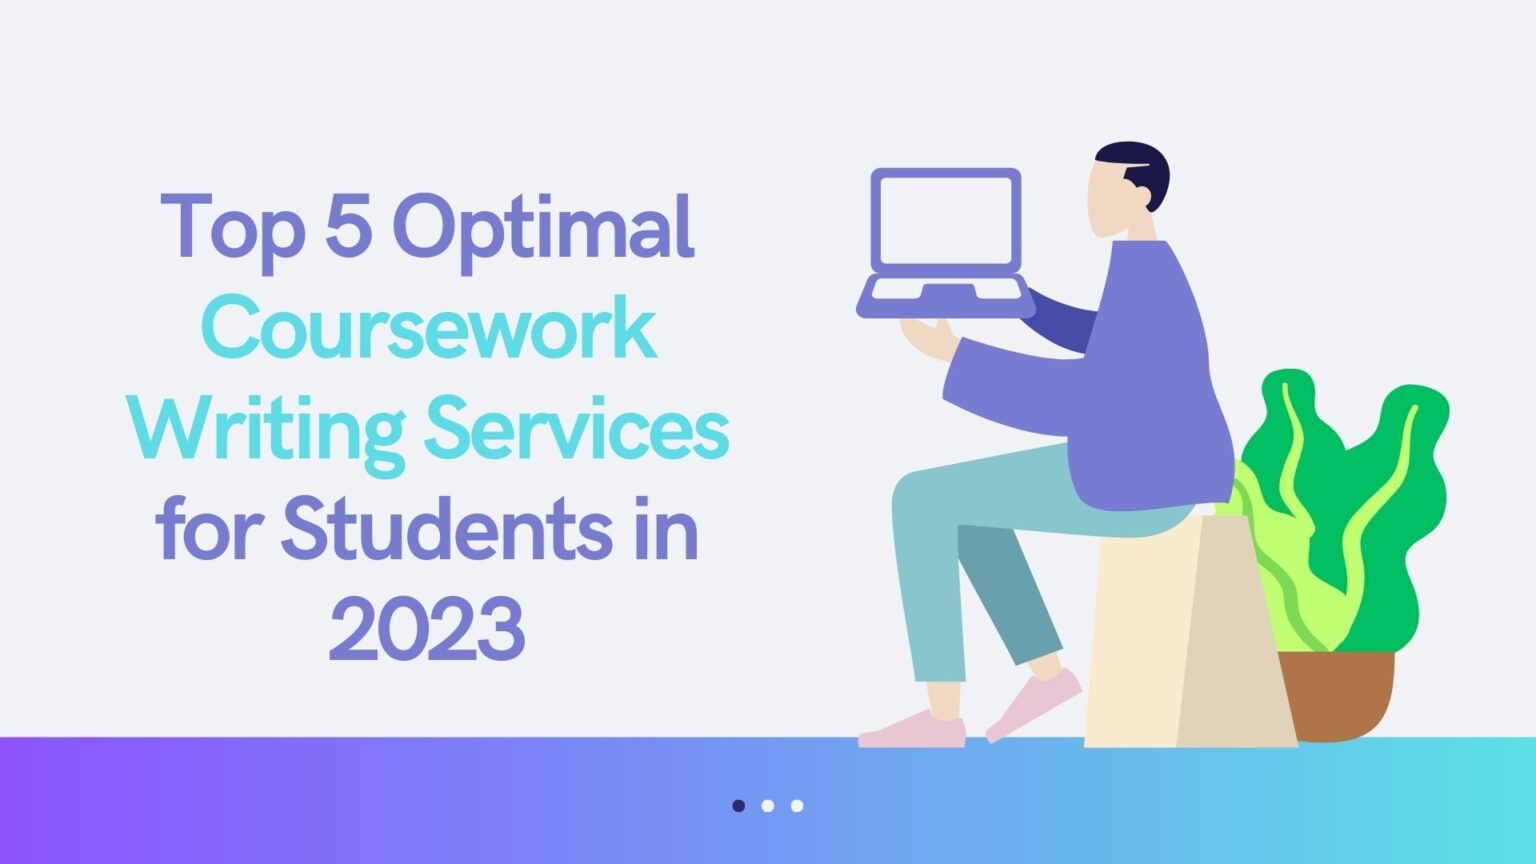 TOP 5 OPTIMAL COURSEWORK WRITING SERVICES FOR STUDENTS IN 2023